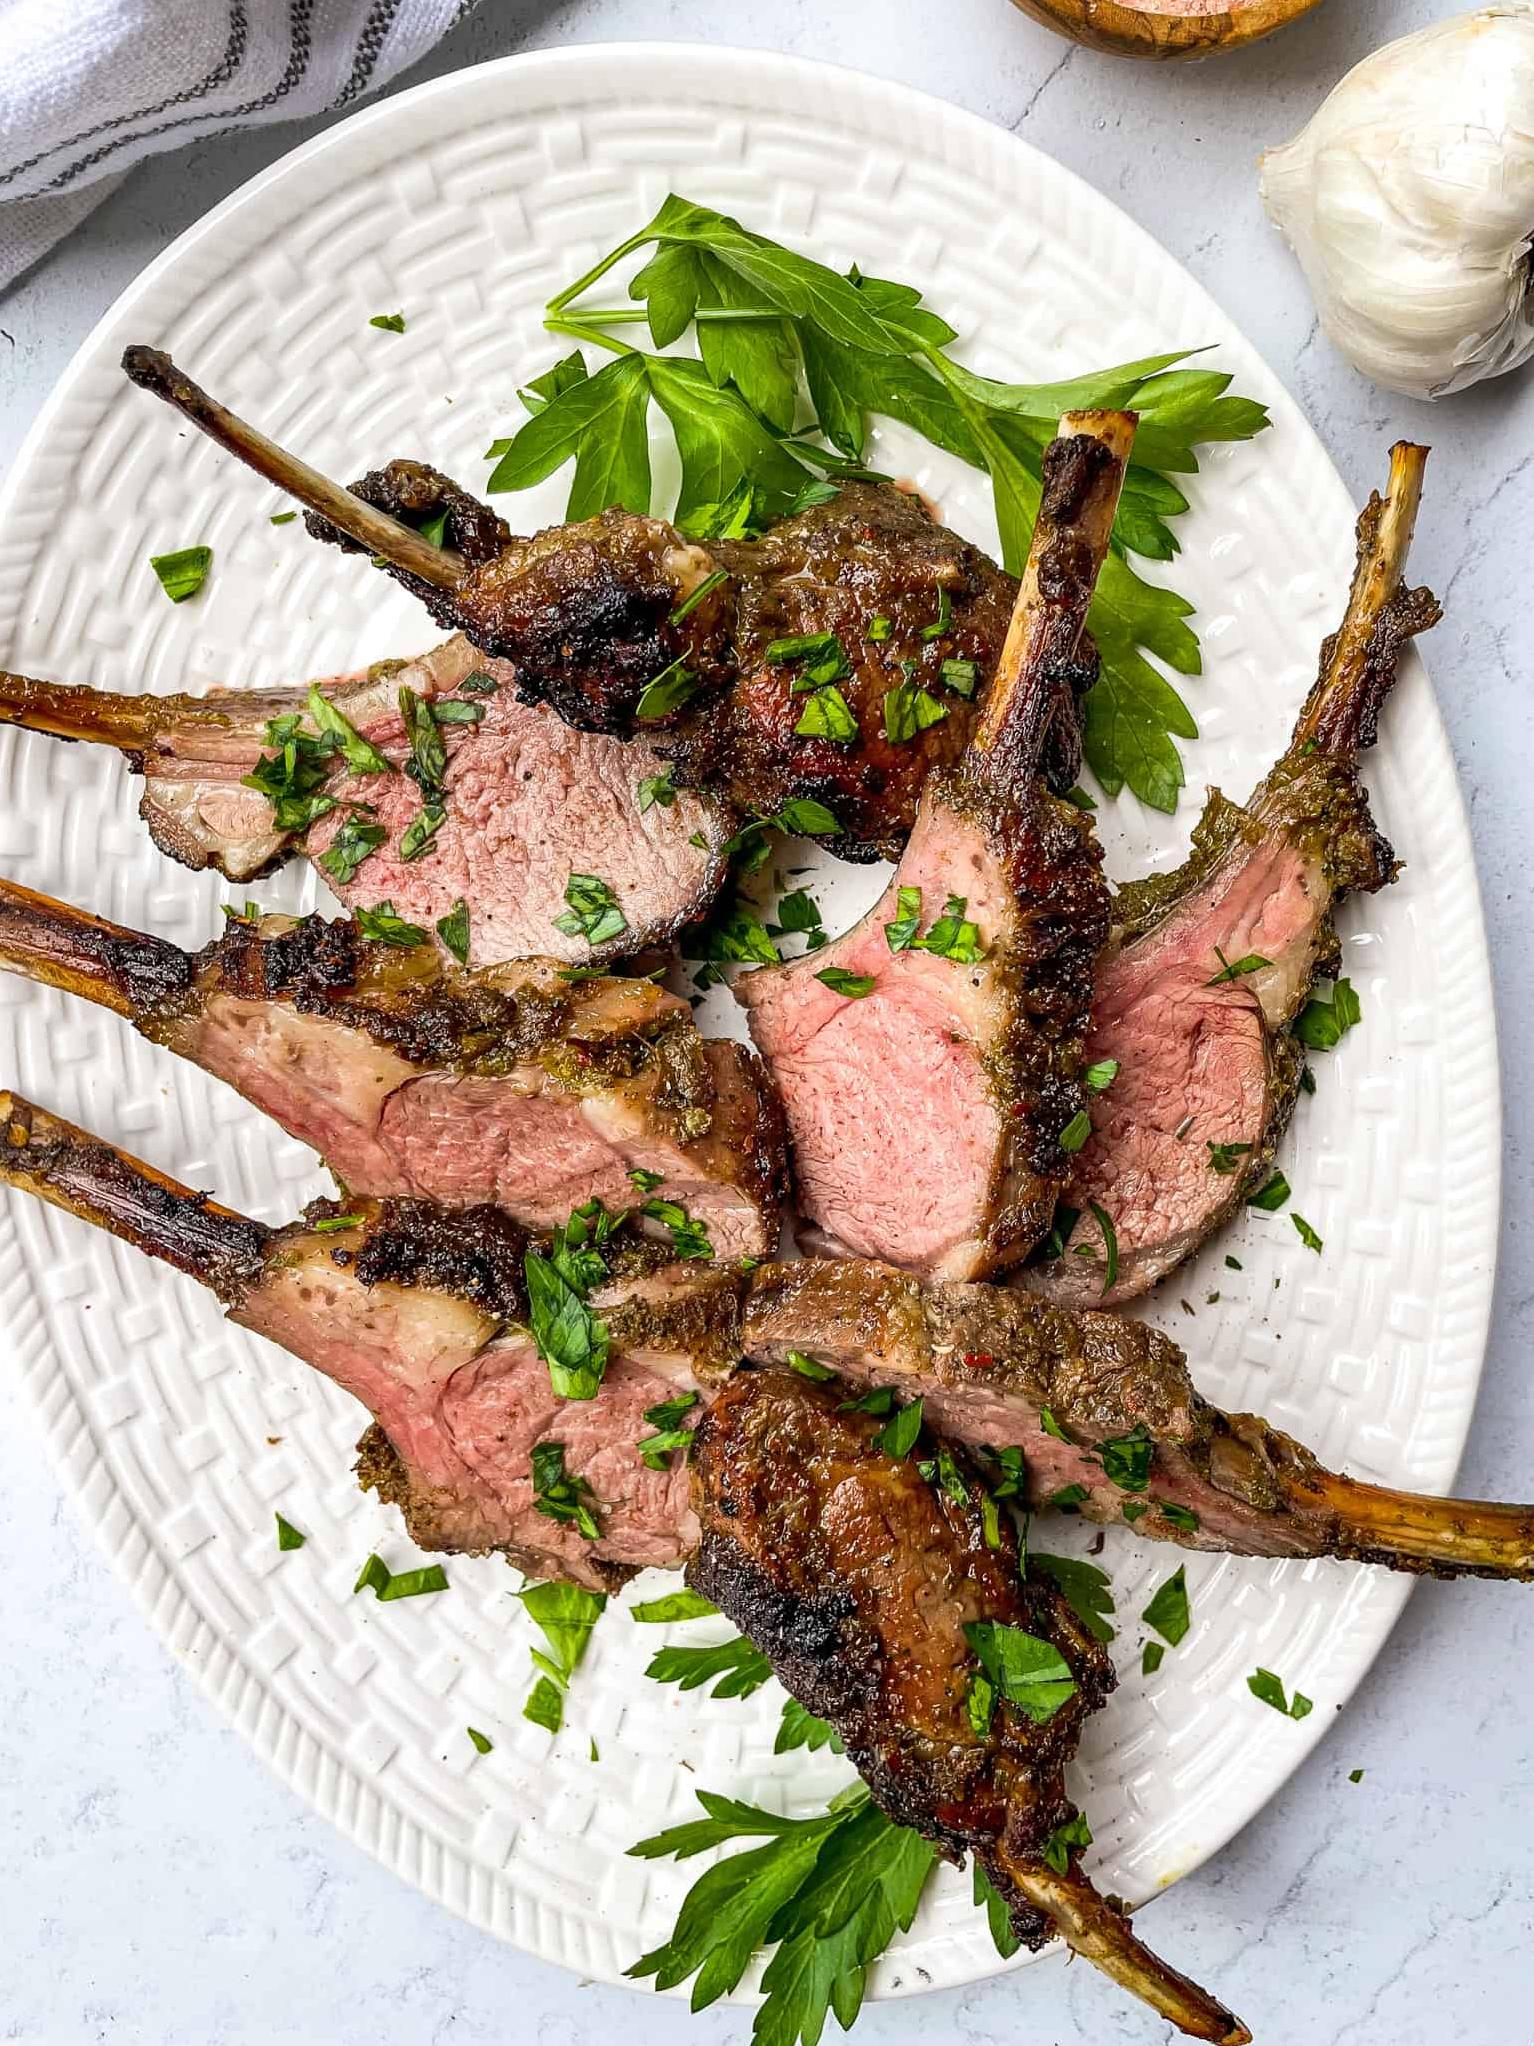  Grilled to perfection and seasoned with aromatic herbs, these lamb chops are a delight!